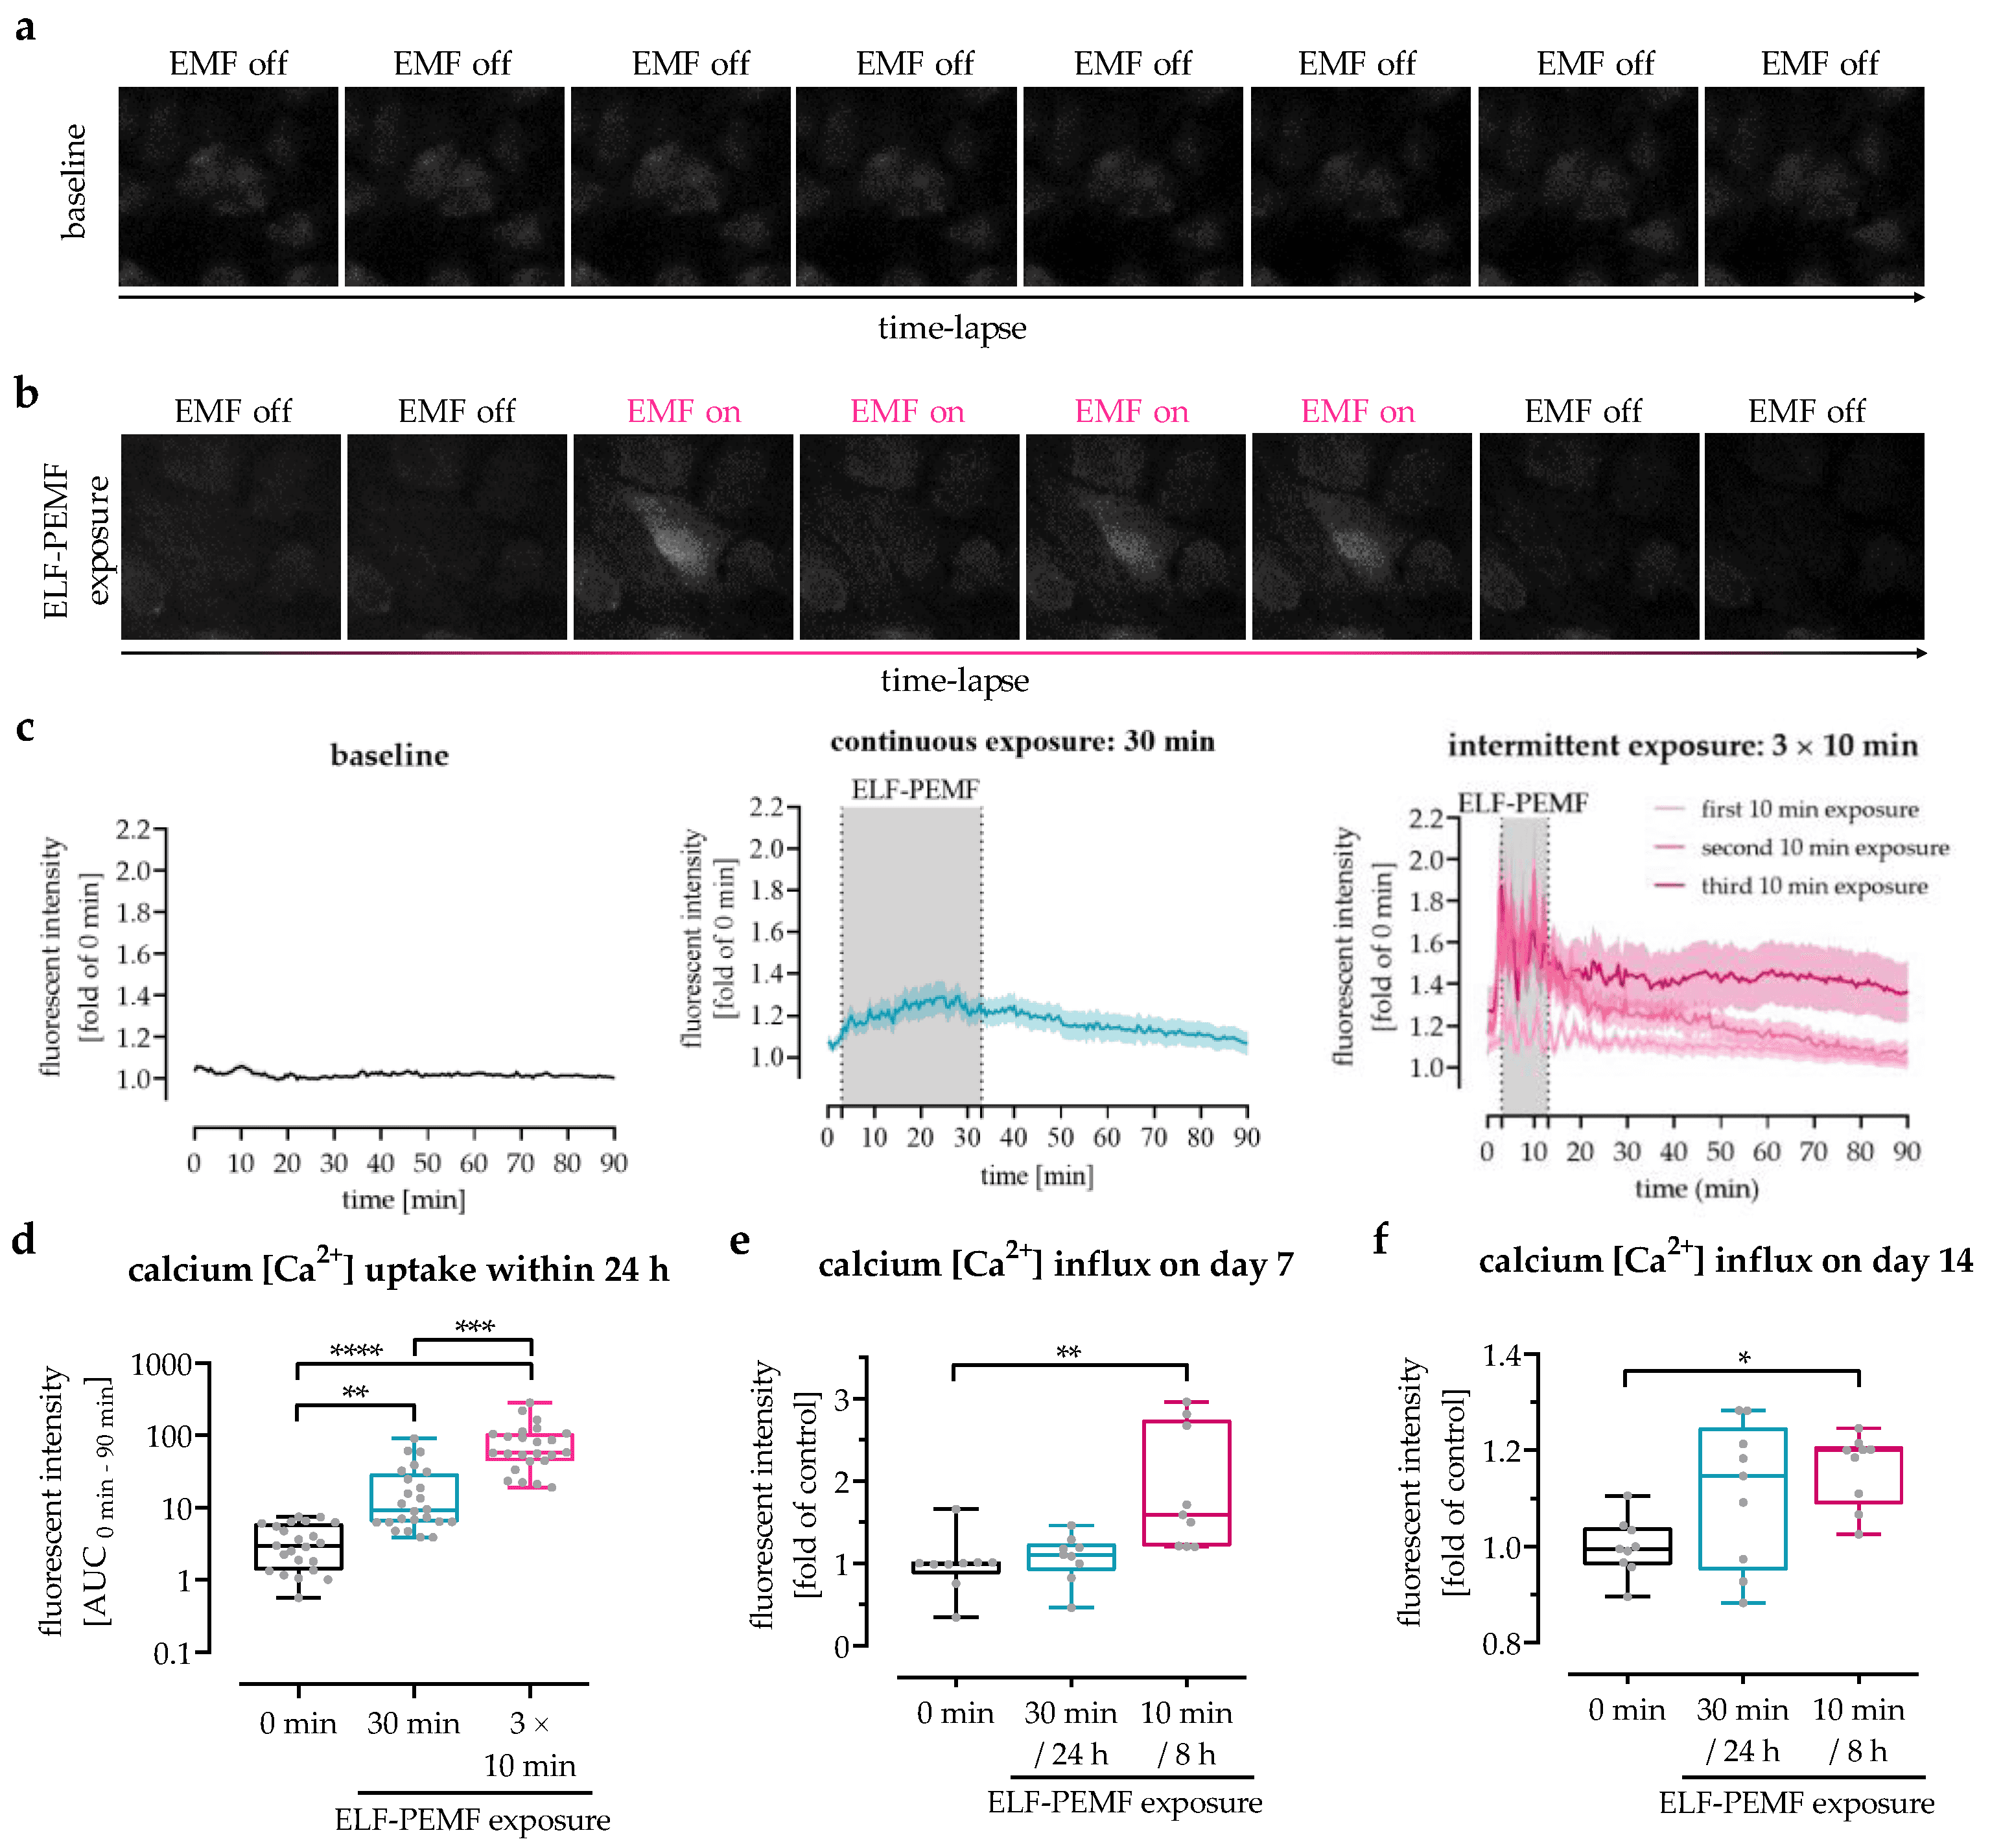 Analysis of 16 Hz ELF-PEMF-dependent Ca2+ influx into SCP-1 cells. Intracellular calcium levels were detected using the fluorescent probe Fluo-8. Time-lapse fluorescent image series of Fluo-8-loaded SCP-1 cells (a) without or (b) with 16 Hz ELF-PEMF exposure. (c) Automated image analysis using the time series analyzer V3 plugin of ImageJ software was used to determine intracellular Ca2+ levels over time. (d) Area under the curve (AUC) was used to determine the net-Ca2+ uptake within the first 24 h. Ca2+ influx into SCP-1 cells, osteogenically differentiated for (e) 7 and (f) 14 days with or without daily exposure to 16 Hz ELF-PEMF, was quantified at λex = 495 nm and λem = 516 nm using a microplate reader, 2 min immediately after starting the ELF-PEMF exposure. N = 3, n ≥ 3. Data are displayed as line graphs with error bands or box plots with individual data points. Data were analyzed by non-parametric one-way ANOVA followed by Friedman’s multiple comparison test, * p < 0.05, ** p < 0.01, *** p < 0.001, and **** p < 0.0001. Source: <b>Intermittent Exposure to a 16 Hz Extremely Low Frequency Pulsed Electromagnetic Field Promotes Osteogenesis In Vitro through Activating Piezo 1-Induced Ca2+ Influx in Osteoprogenitor Cells</b> by Chen, Yangmengfan et.al. <em>Journal of Functional Biomaterials</em>, March 2023.